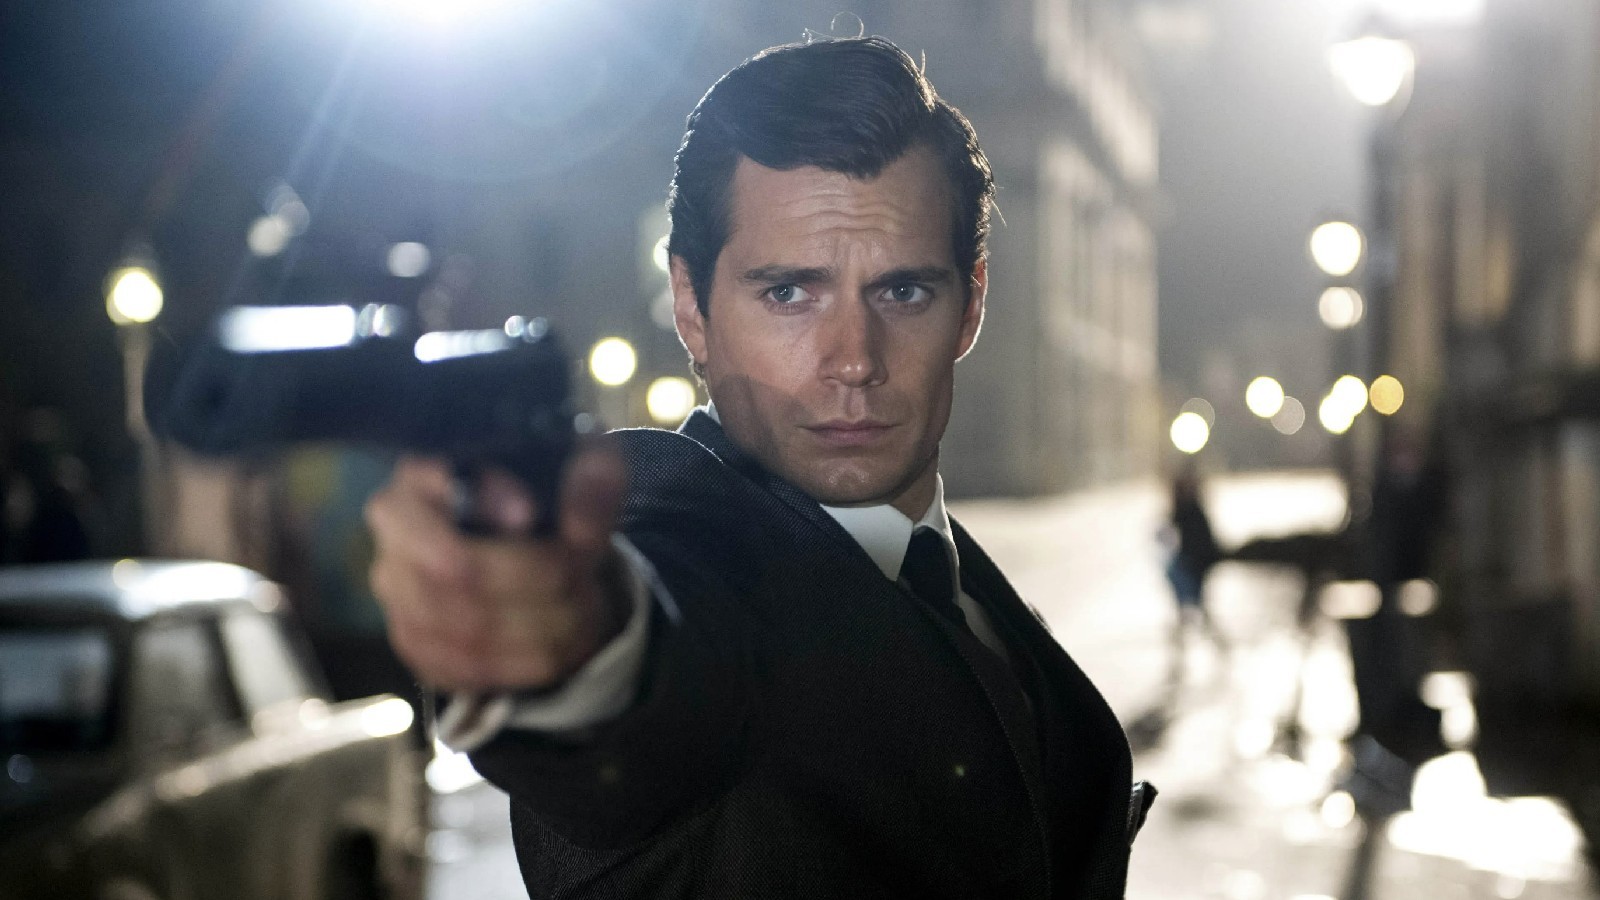 Henry Cavill in The Man From U.N.C.L.E (2015).